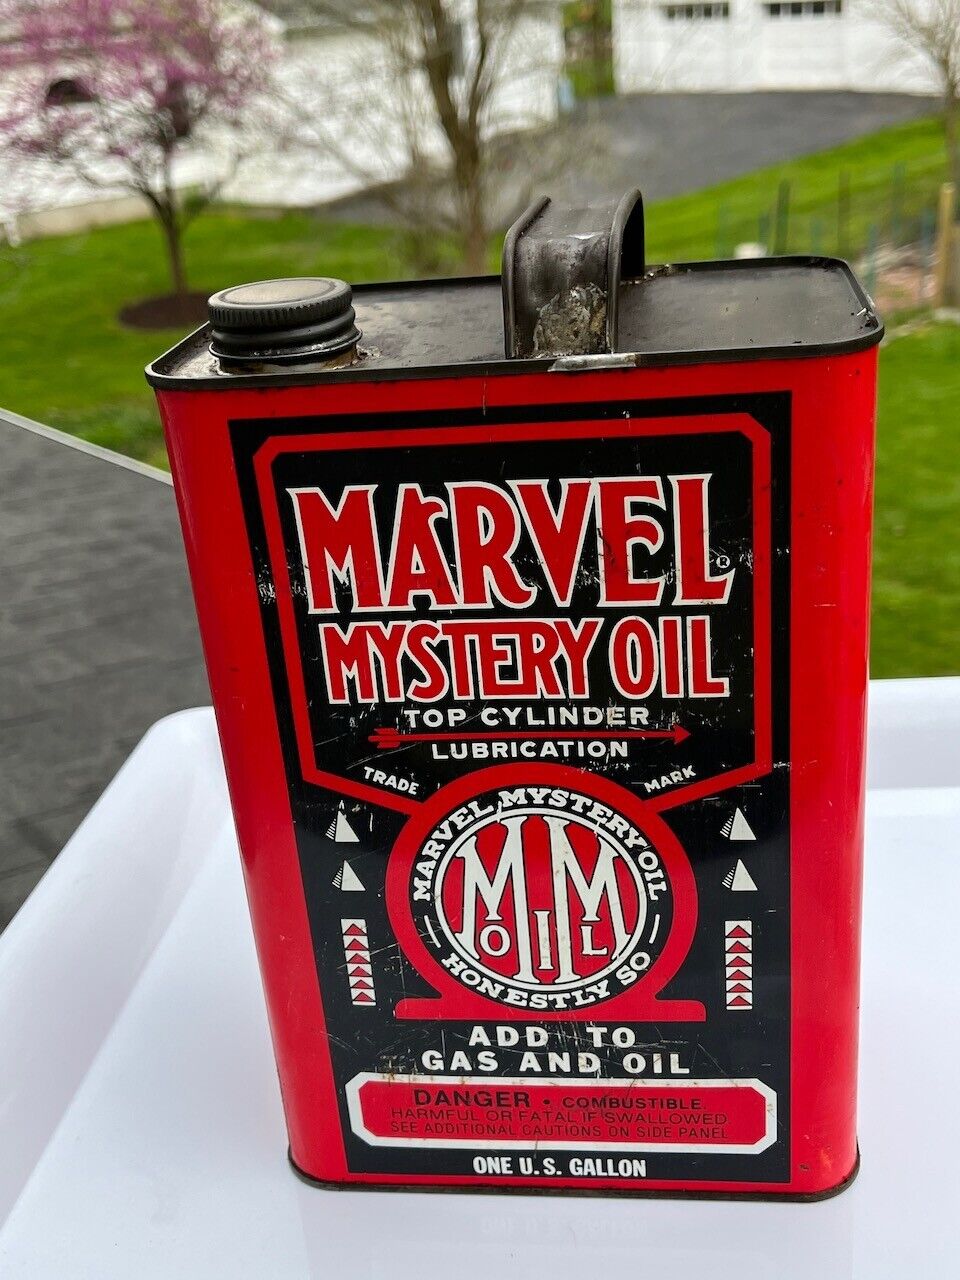 VTG MARVEL MYSTERY Oil Can, 1 Gallon - Gas & Oil, Vintage Antique Can Empty